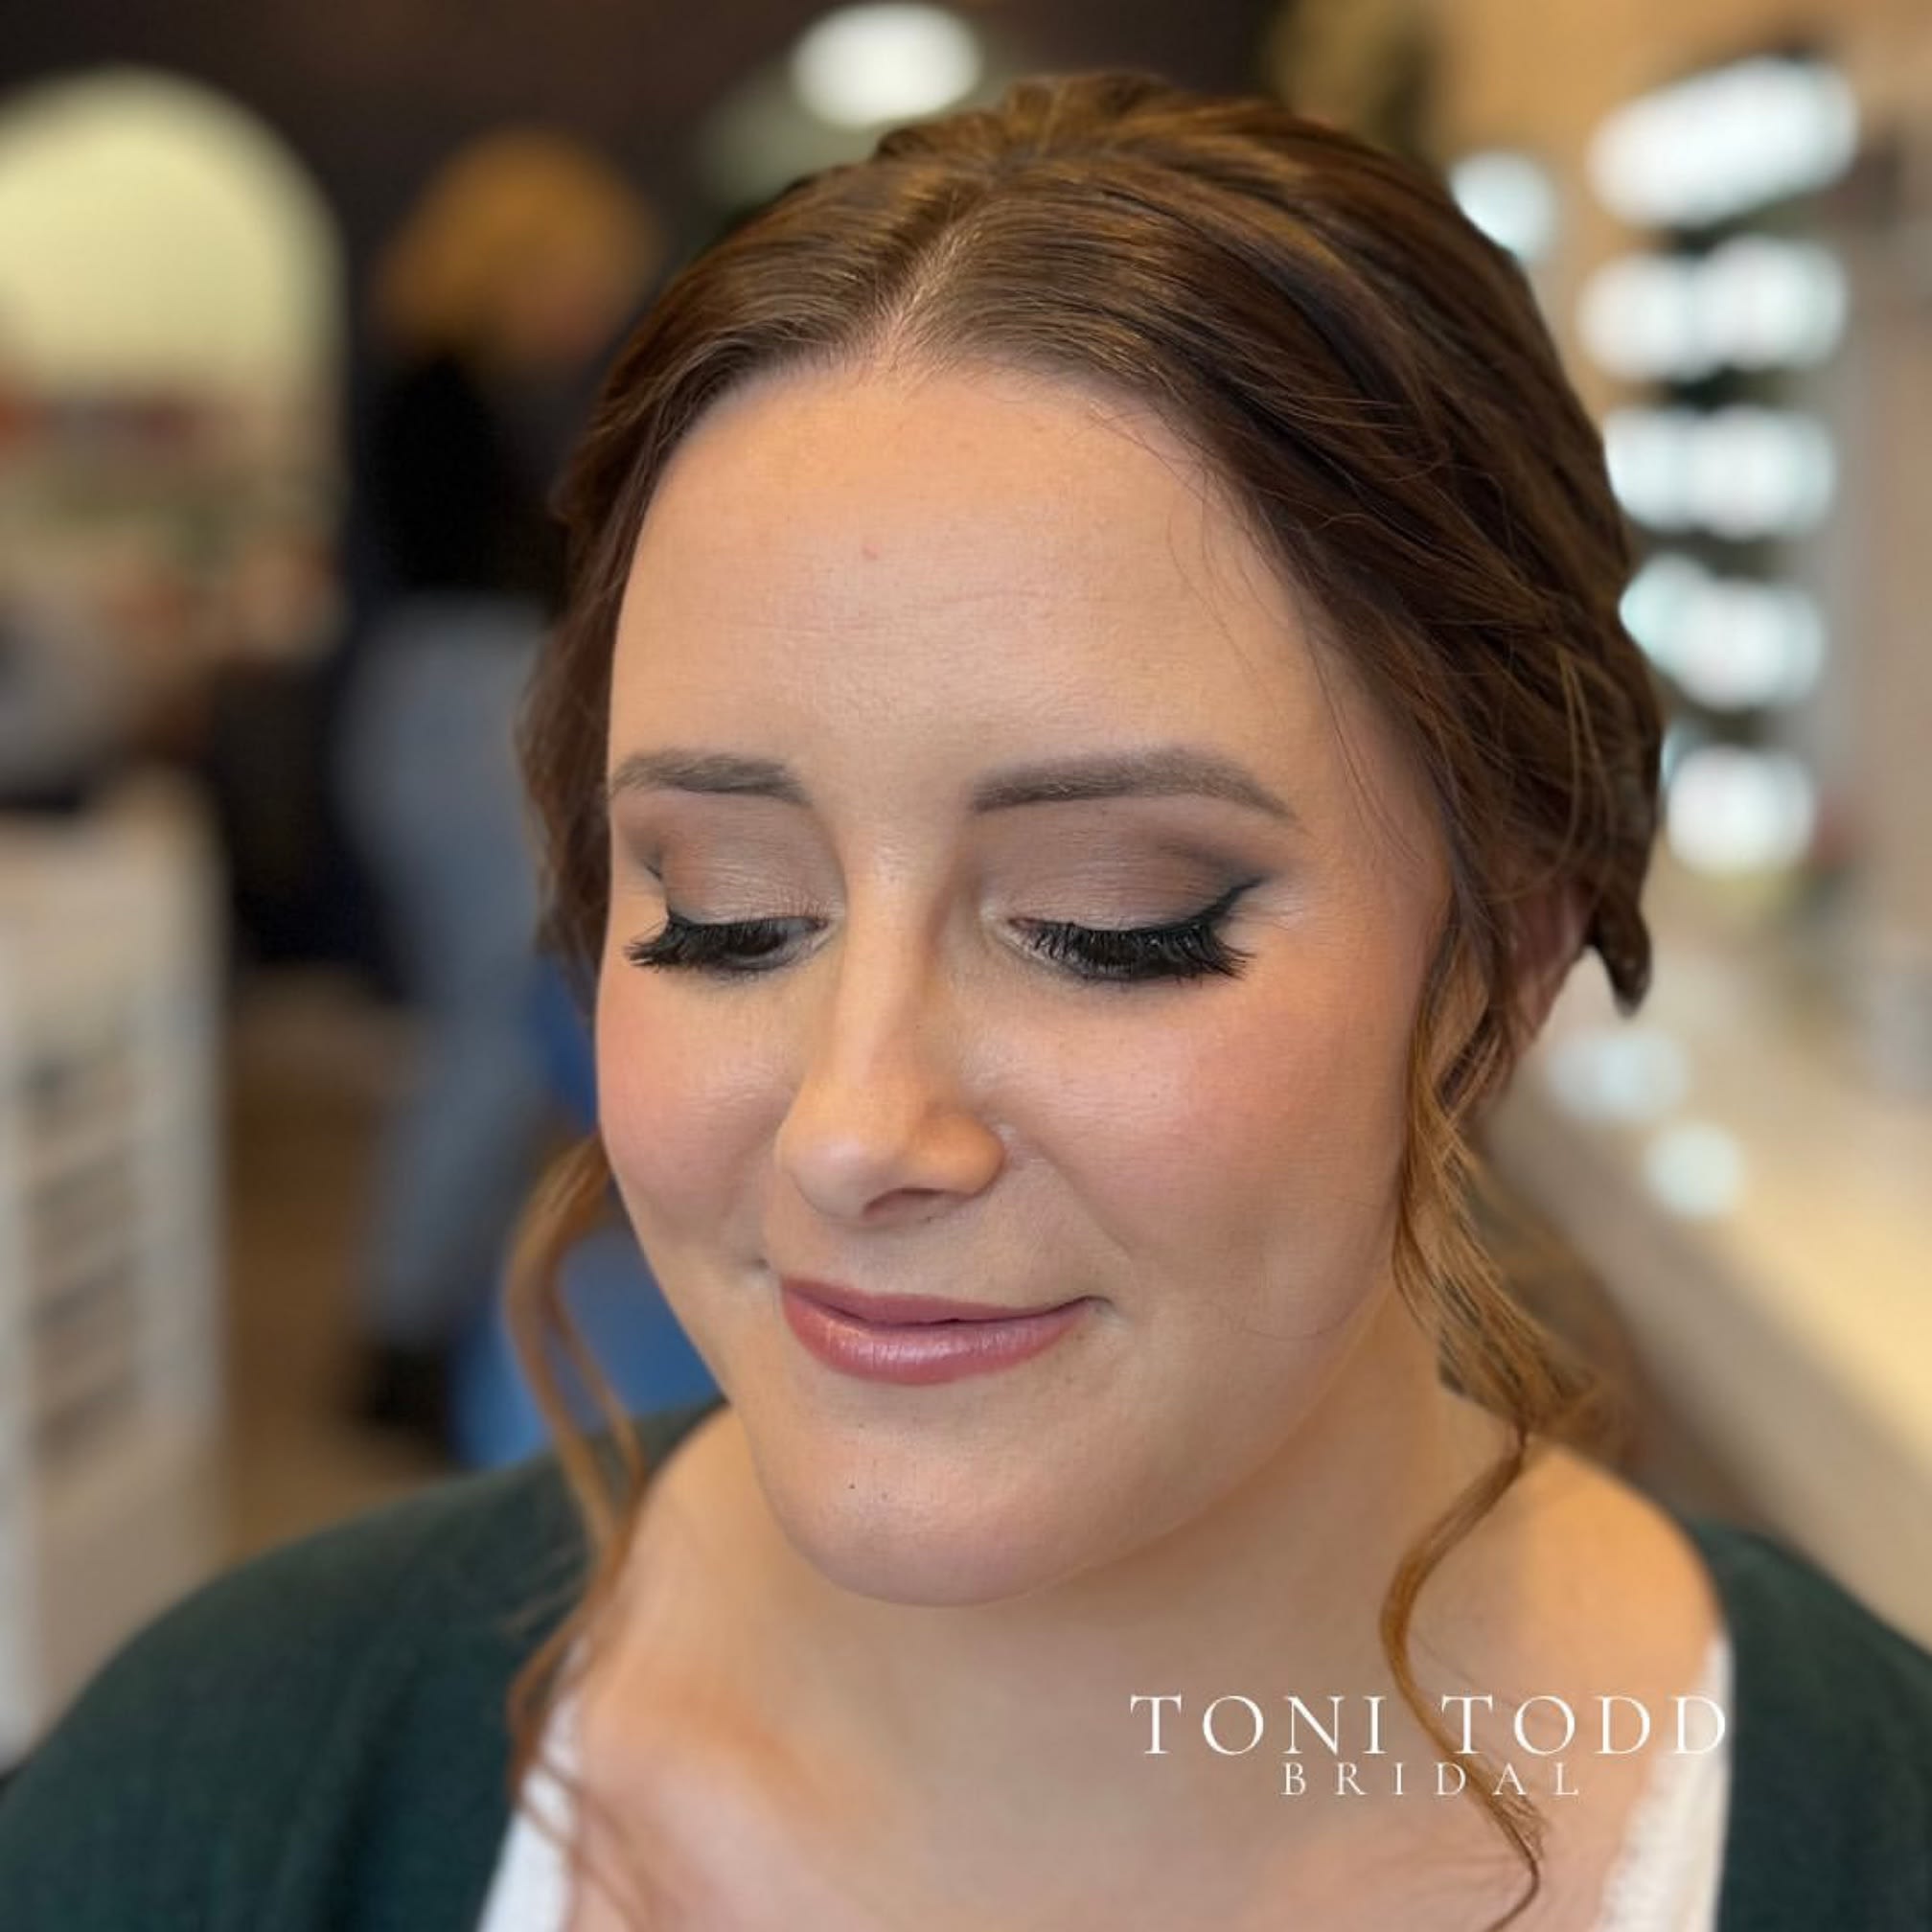 Images Toni Todd Boutique. Wedding Hair And Makeup. Hairdressing Salon